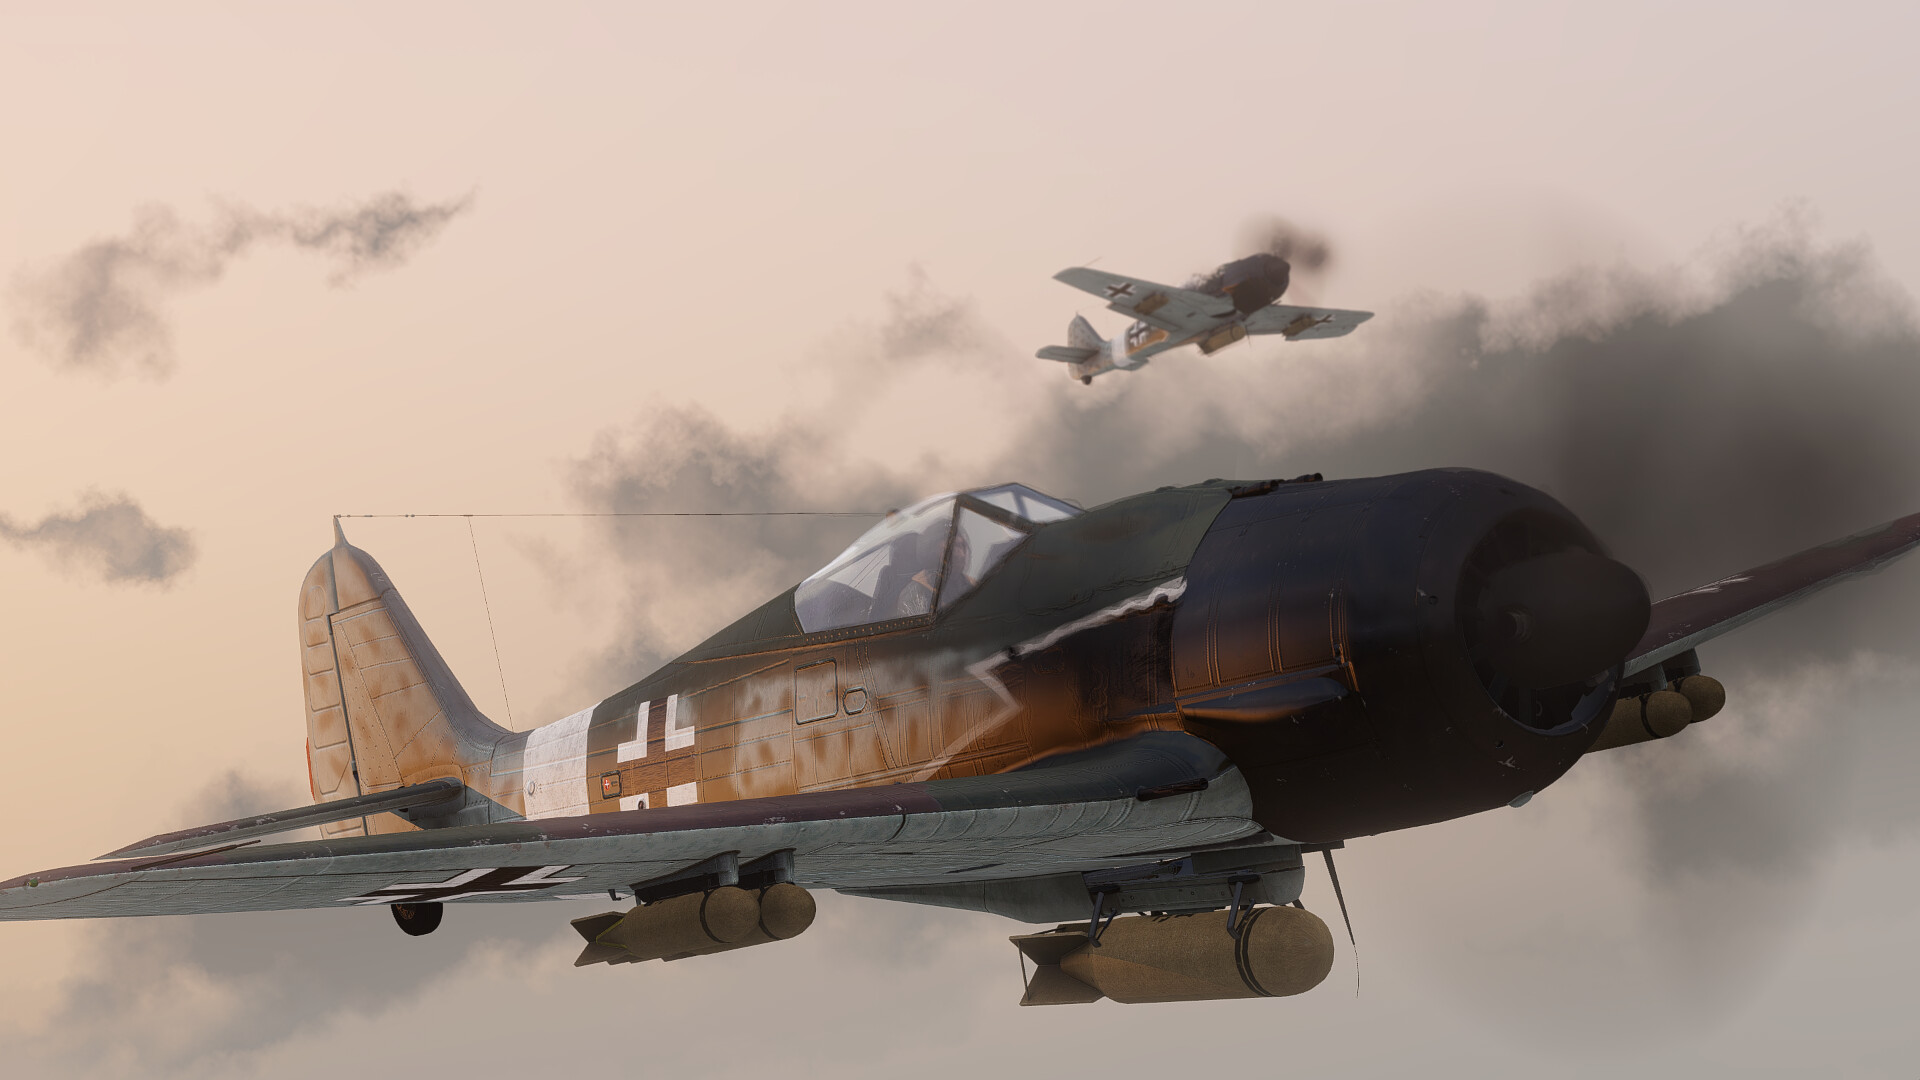 There are no incoming flights dlc.